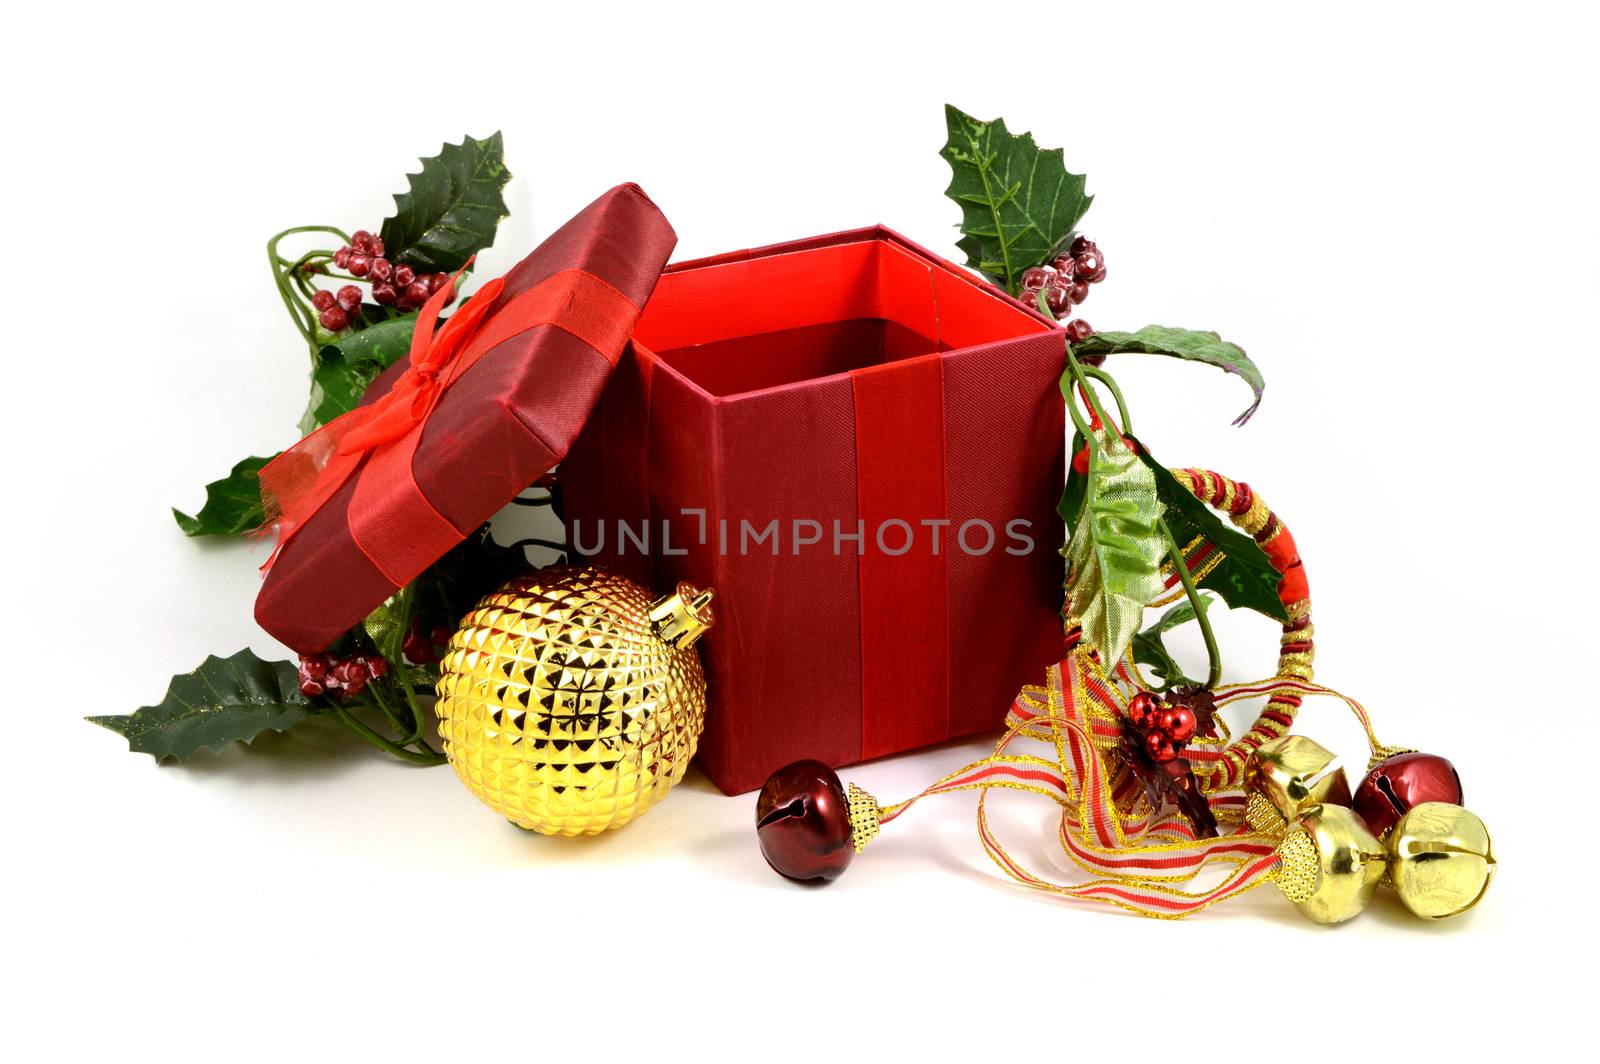 An isolated over white background image of an open red Christmas gift box with some compliamenting decorations added.